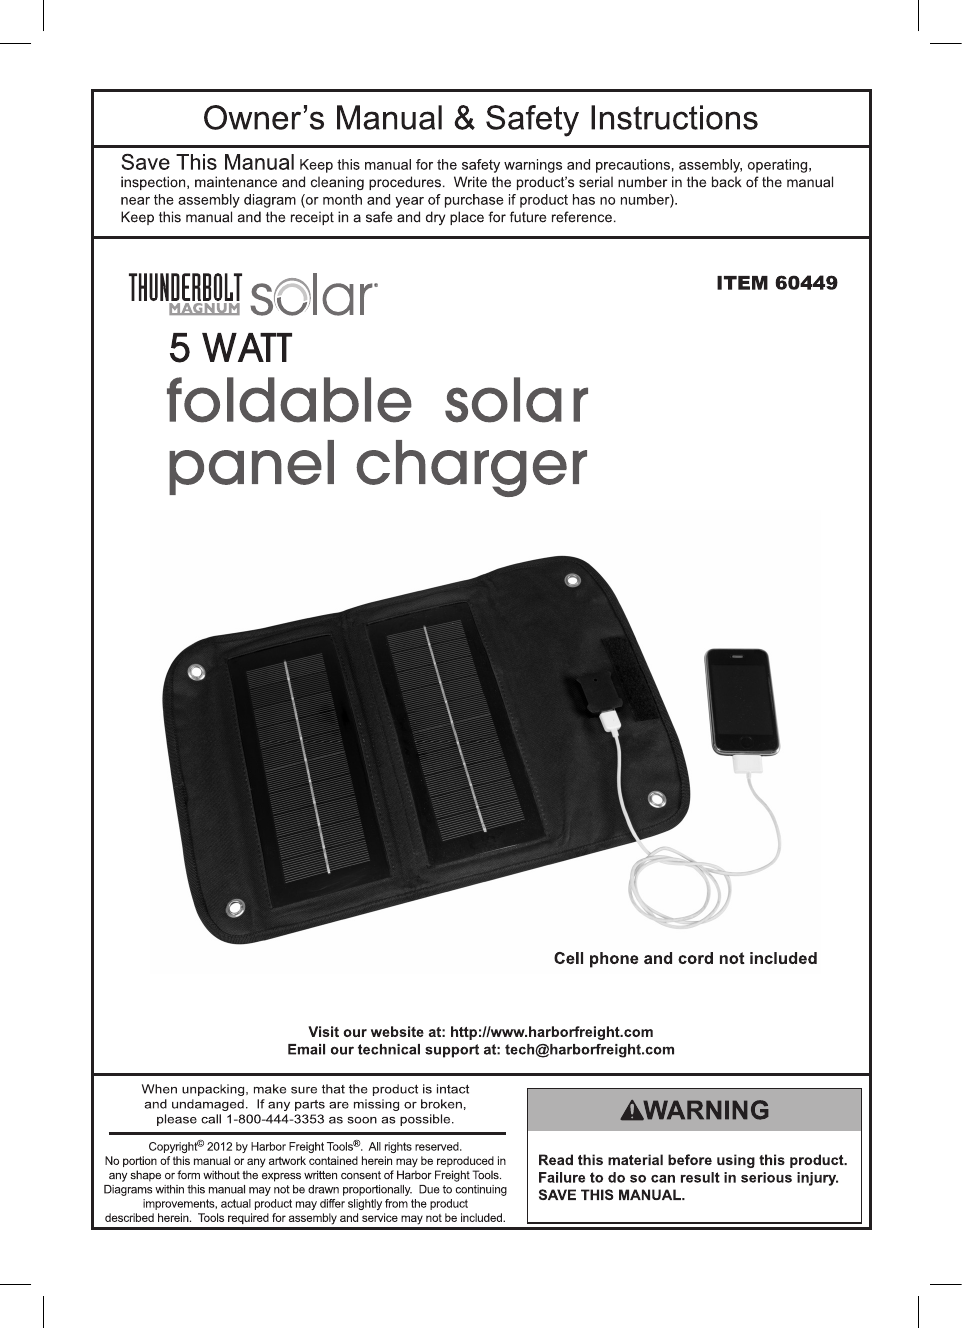 Page 1 of 8 - Harbor-Freight Harbor-Freight-5-Watt-Foldable-Solar-Panel-Charger-Product-Manual-  Harbor-freight-5-watt-foldable-solar-panel-charger-product-manual